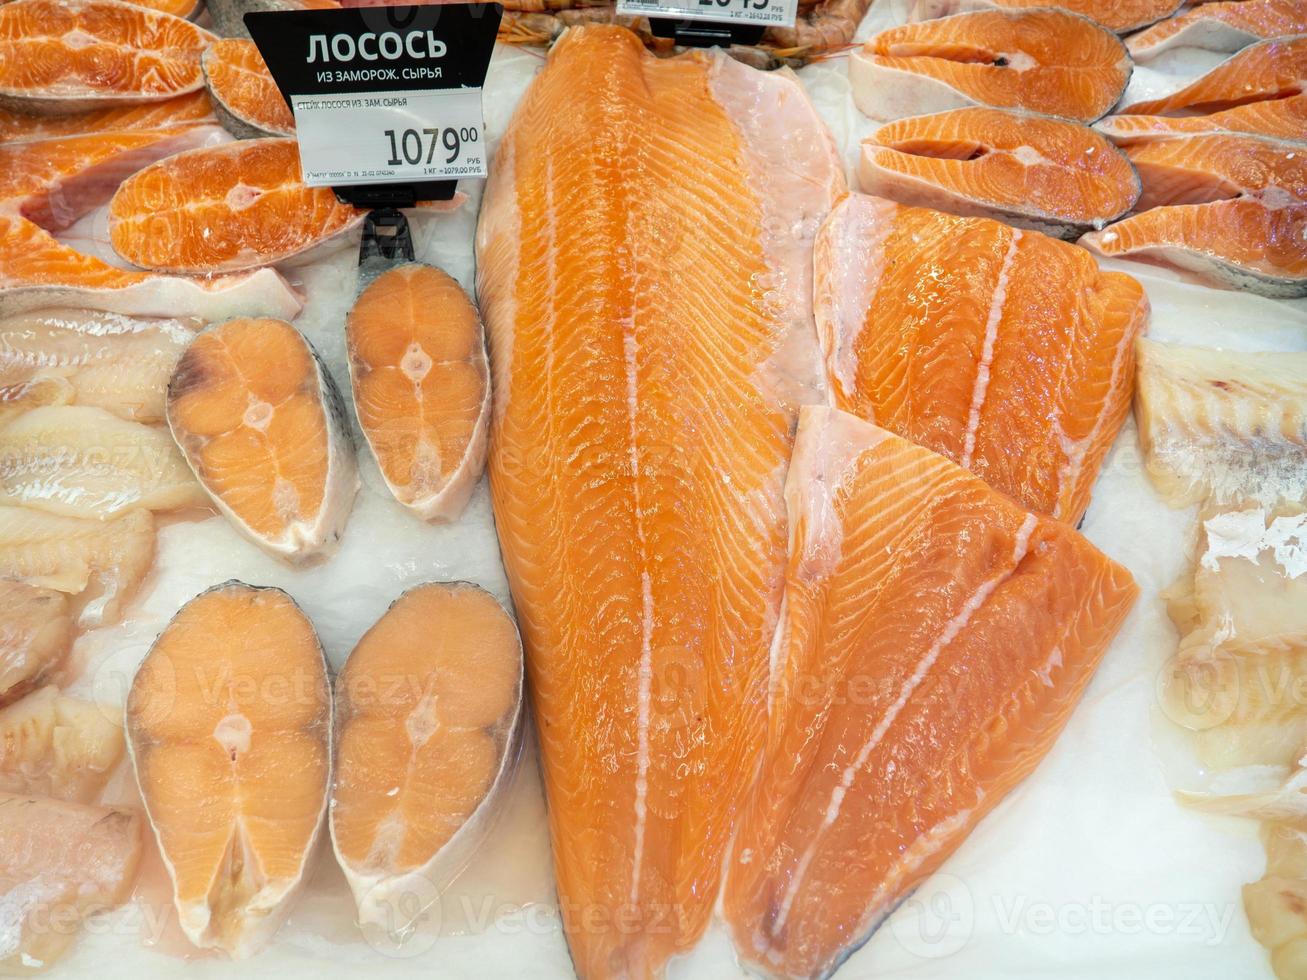 Fish shop. Sale of salmon. Fish heads. Salmon fillet chilled on the counter. Fish in ice.  Meat products photo